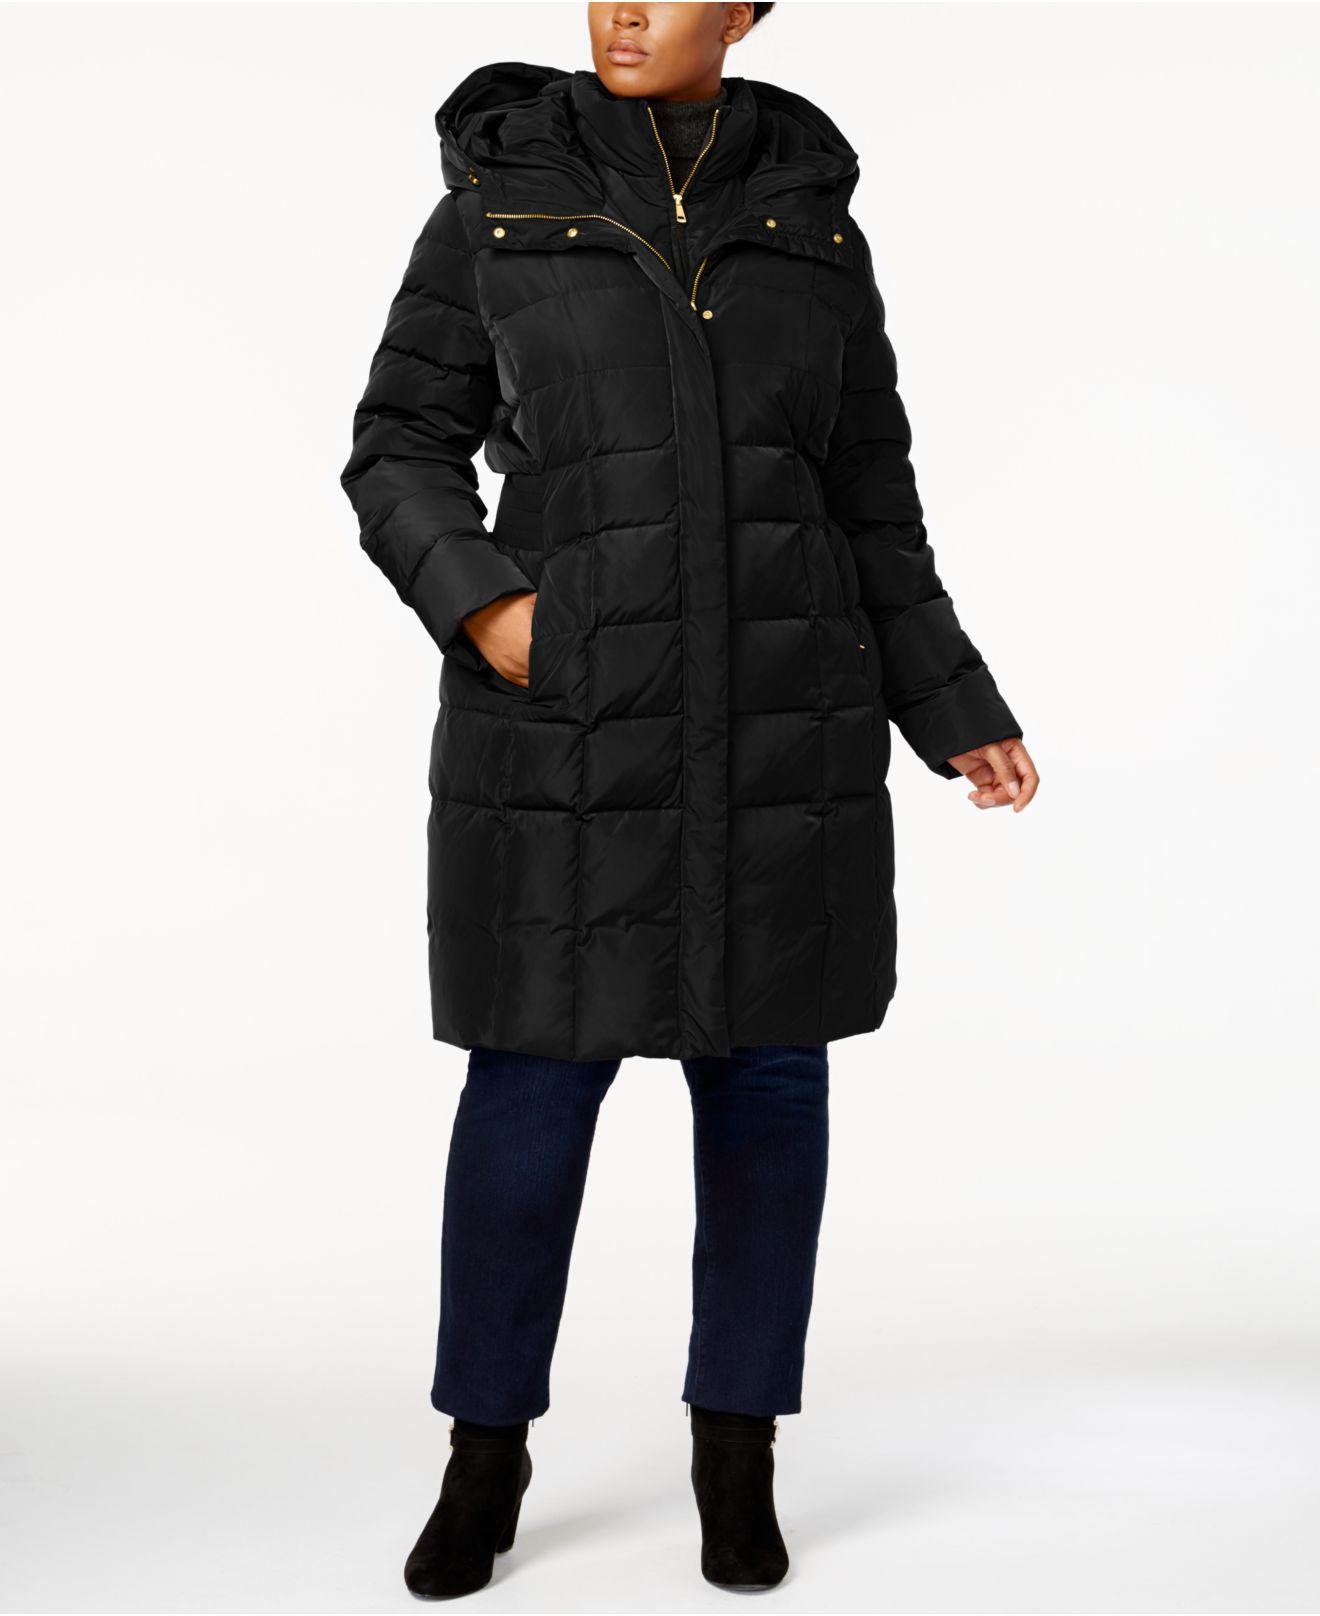 Cole Haan Signature Plus Size Layered Down Puffer Coat in Black - Lyst